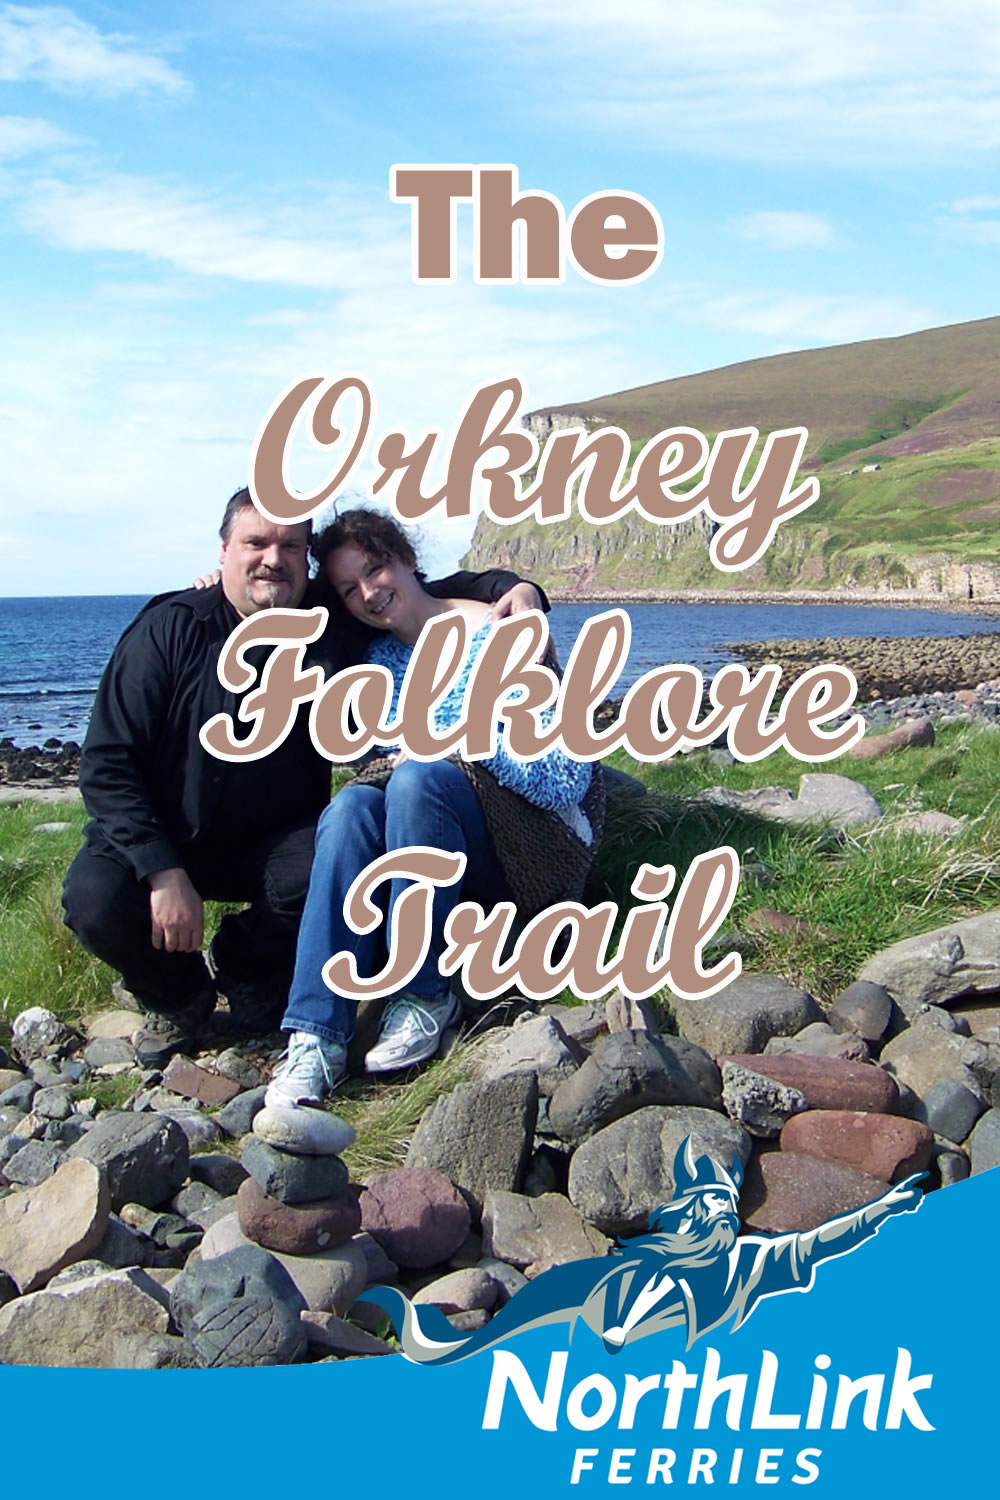 The Orkney Folklore Trail